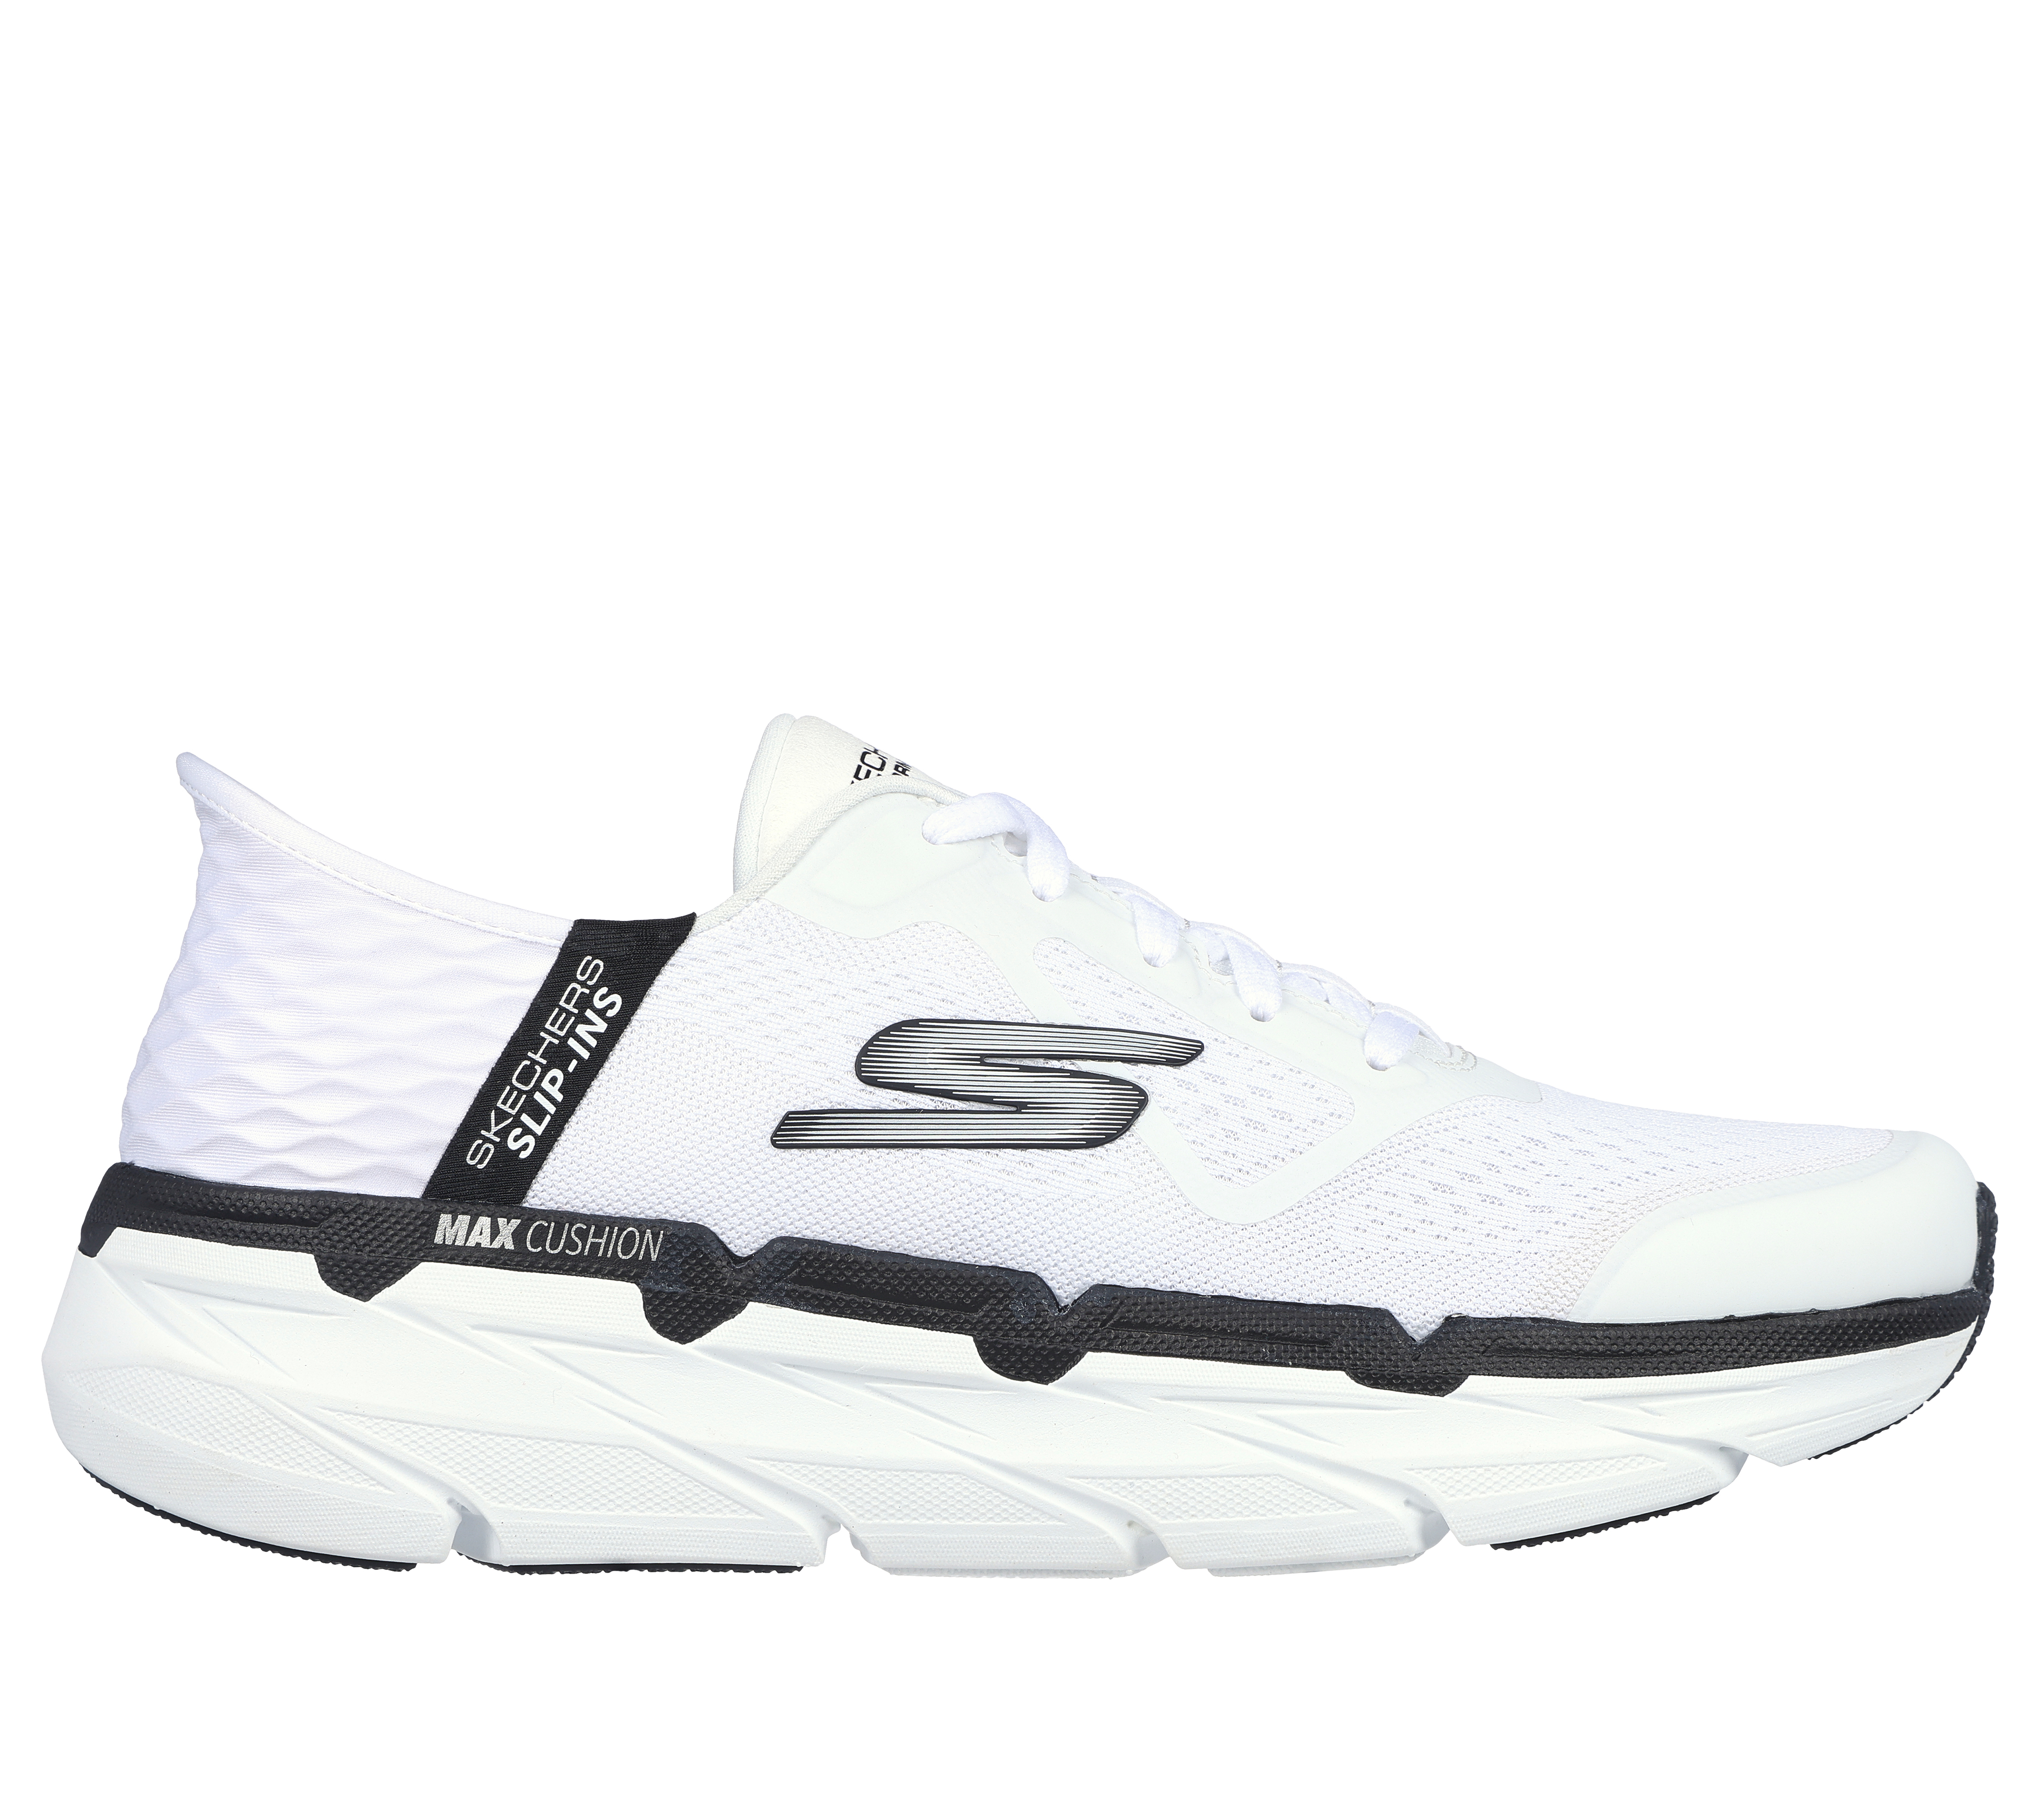 Skechers Sitewide Sale 2023: Take 25% Off All Skechers Shoes